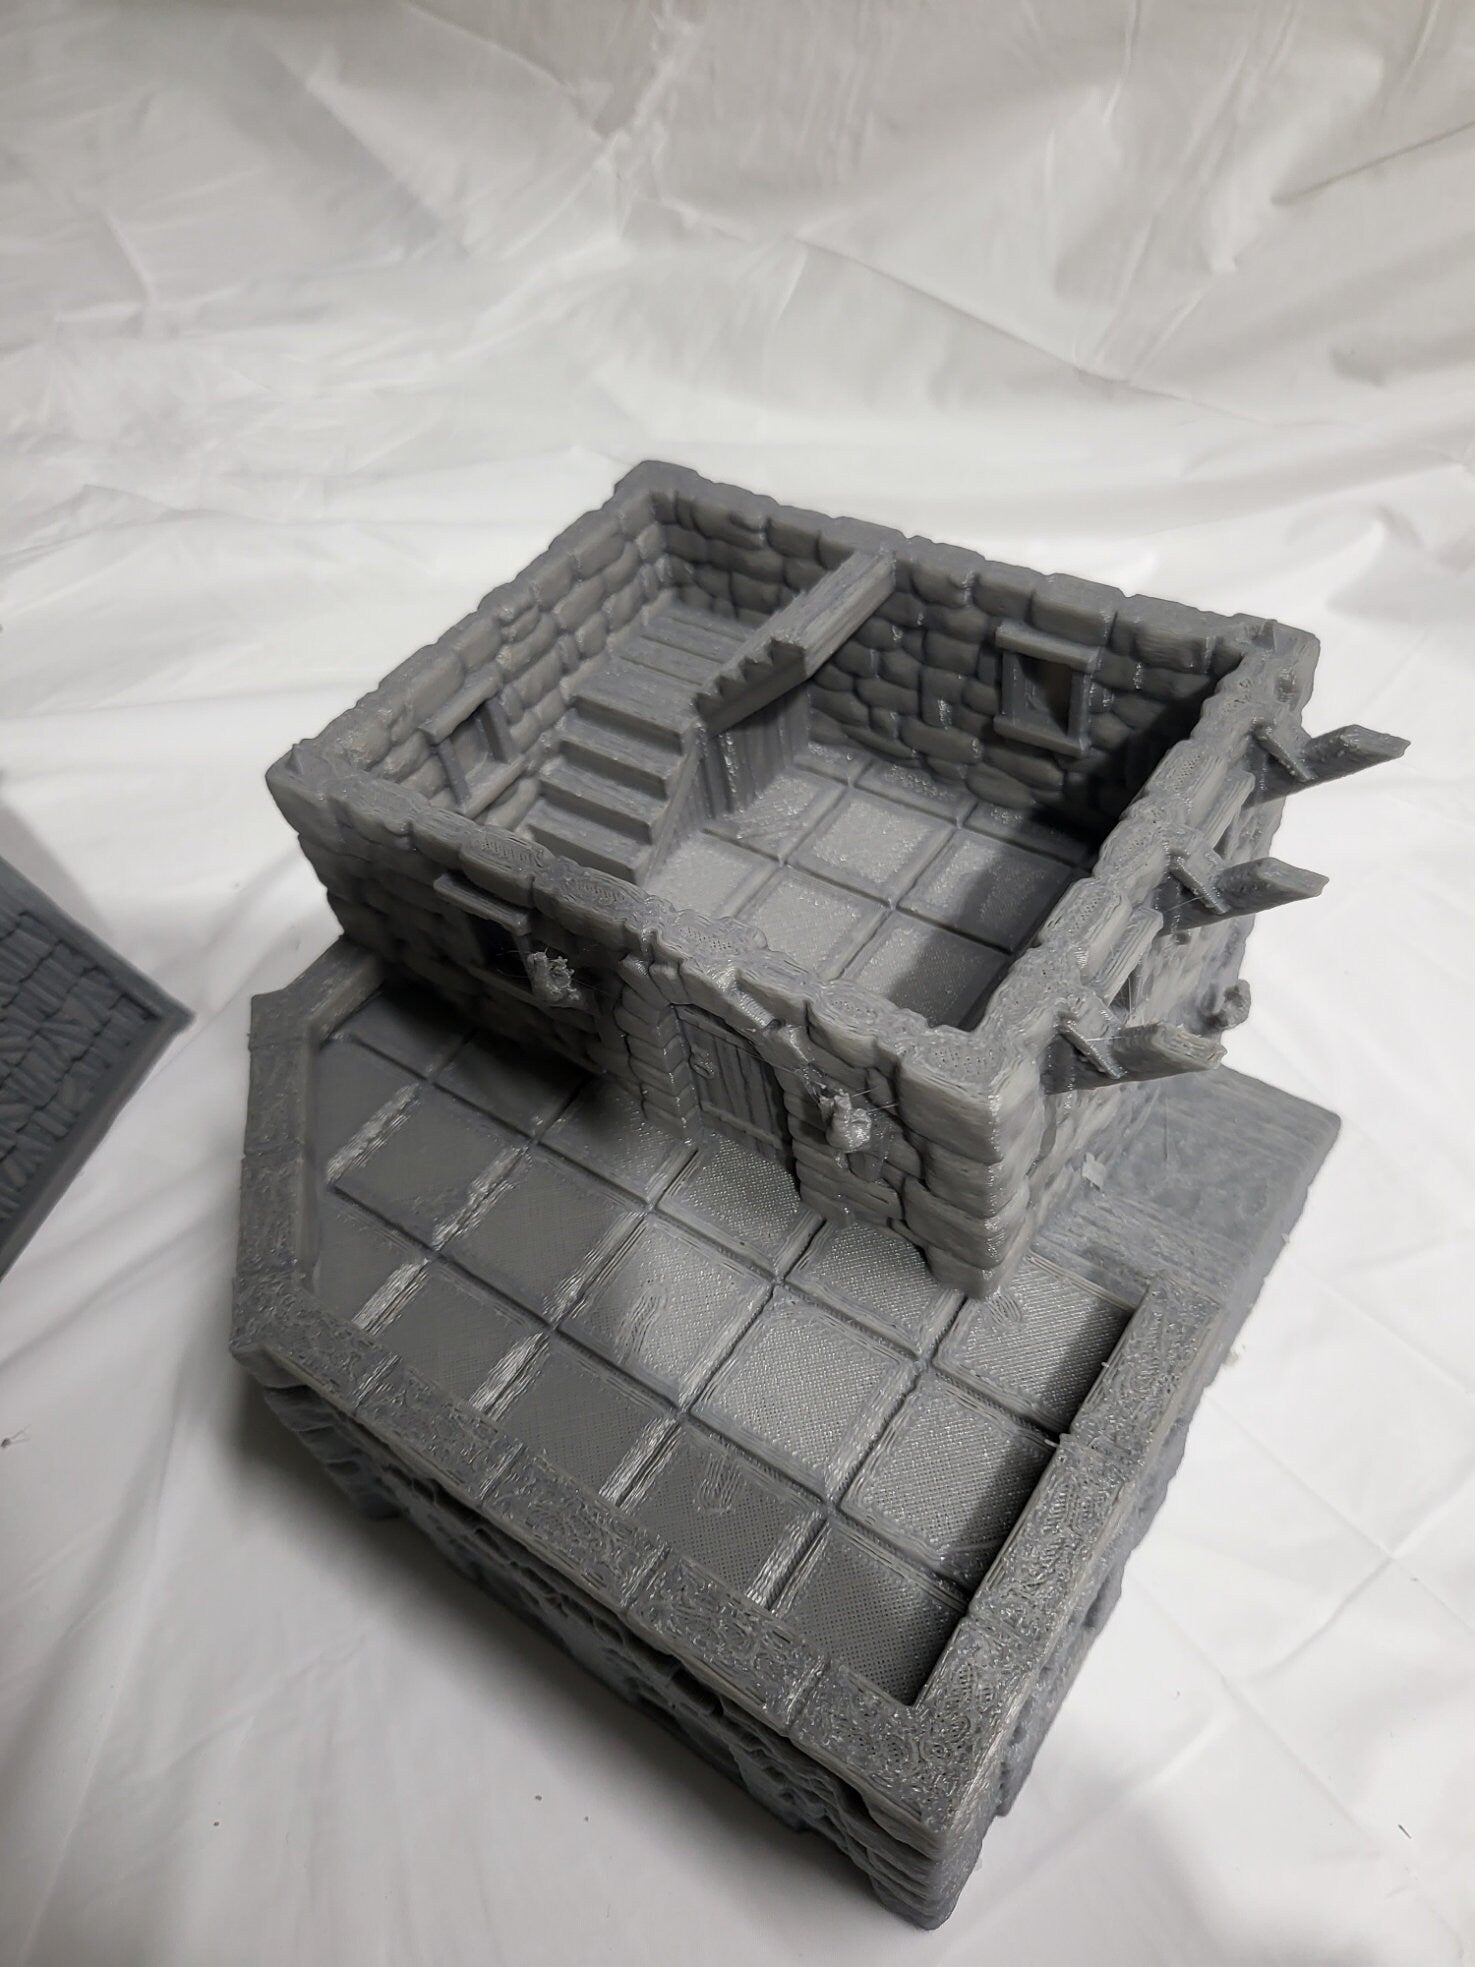 Stormhill Theives Guild, Tabletop Gaming, 28mm Scale, Stormhill City, city set, dungeons and dragons